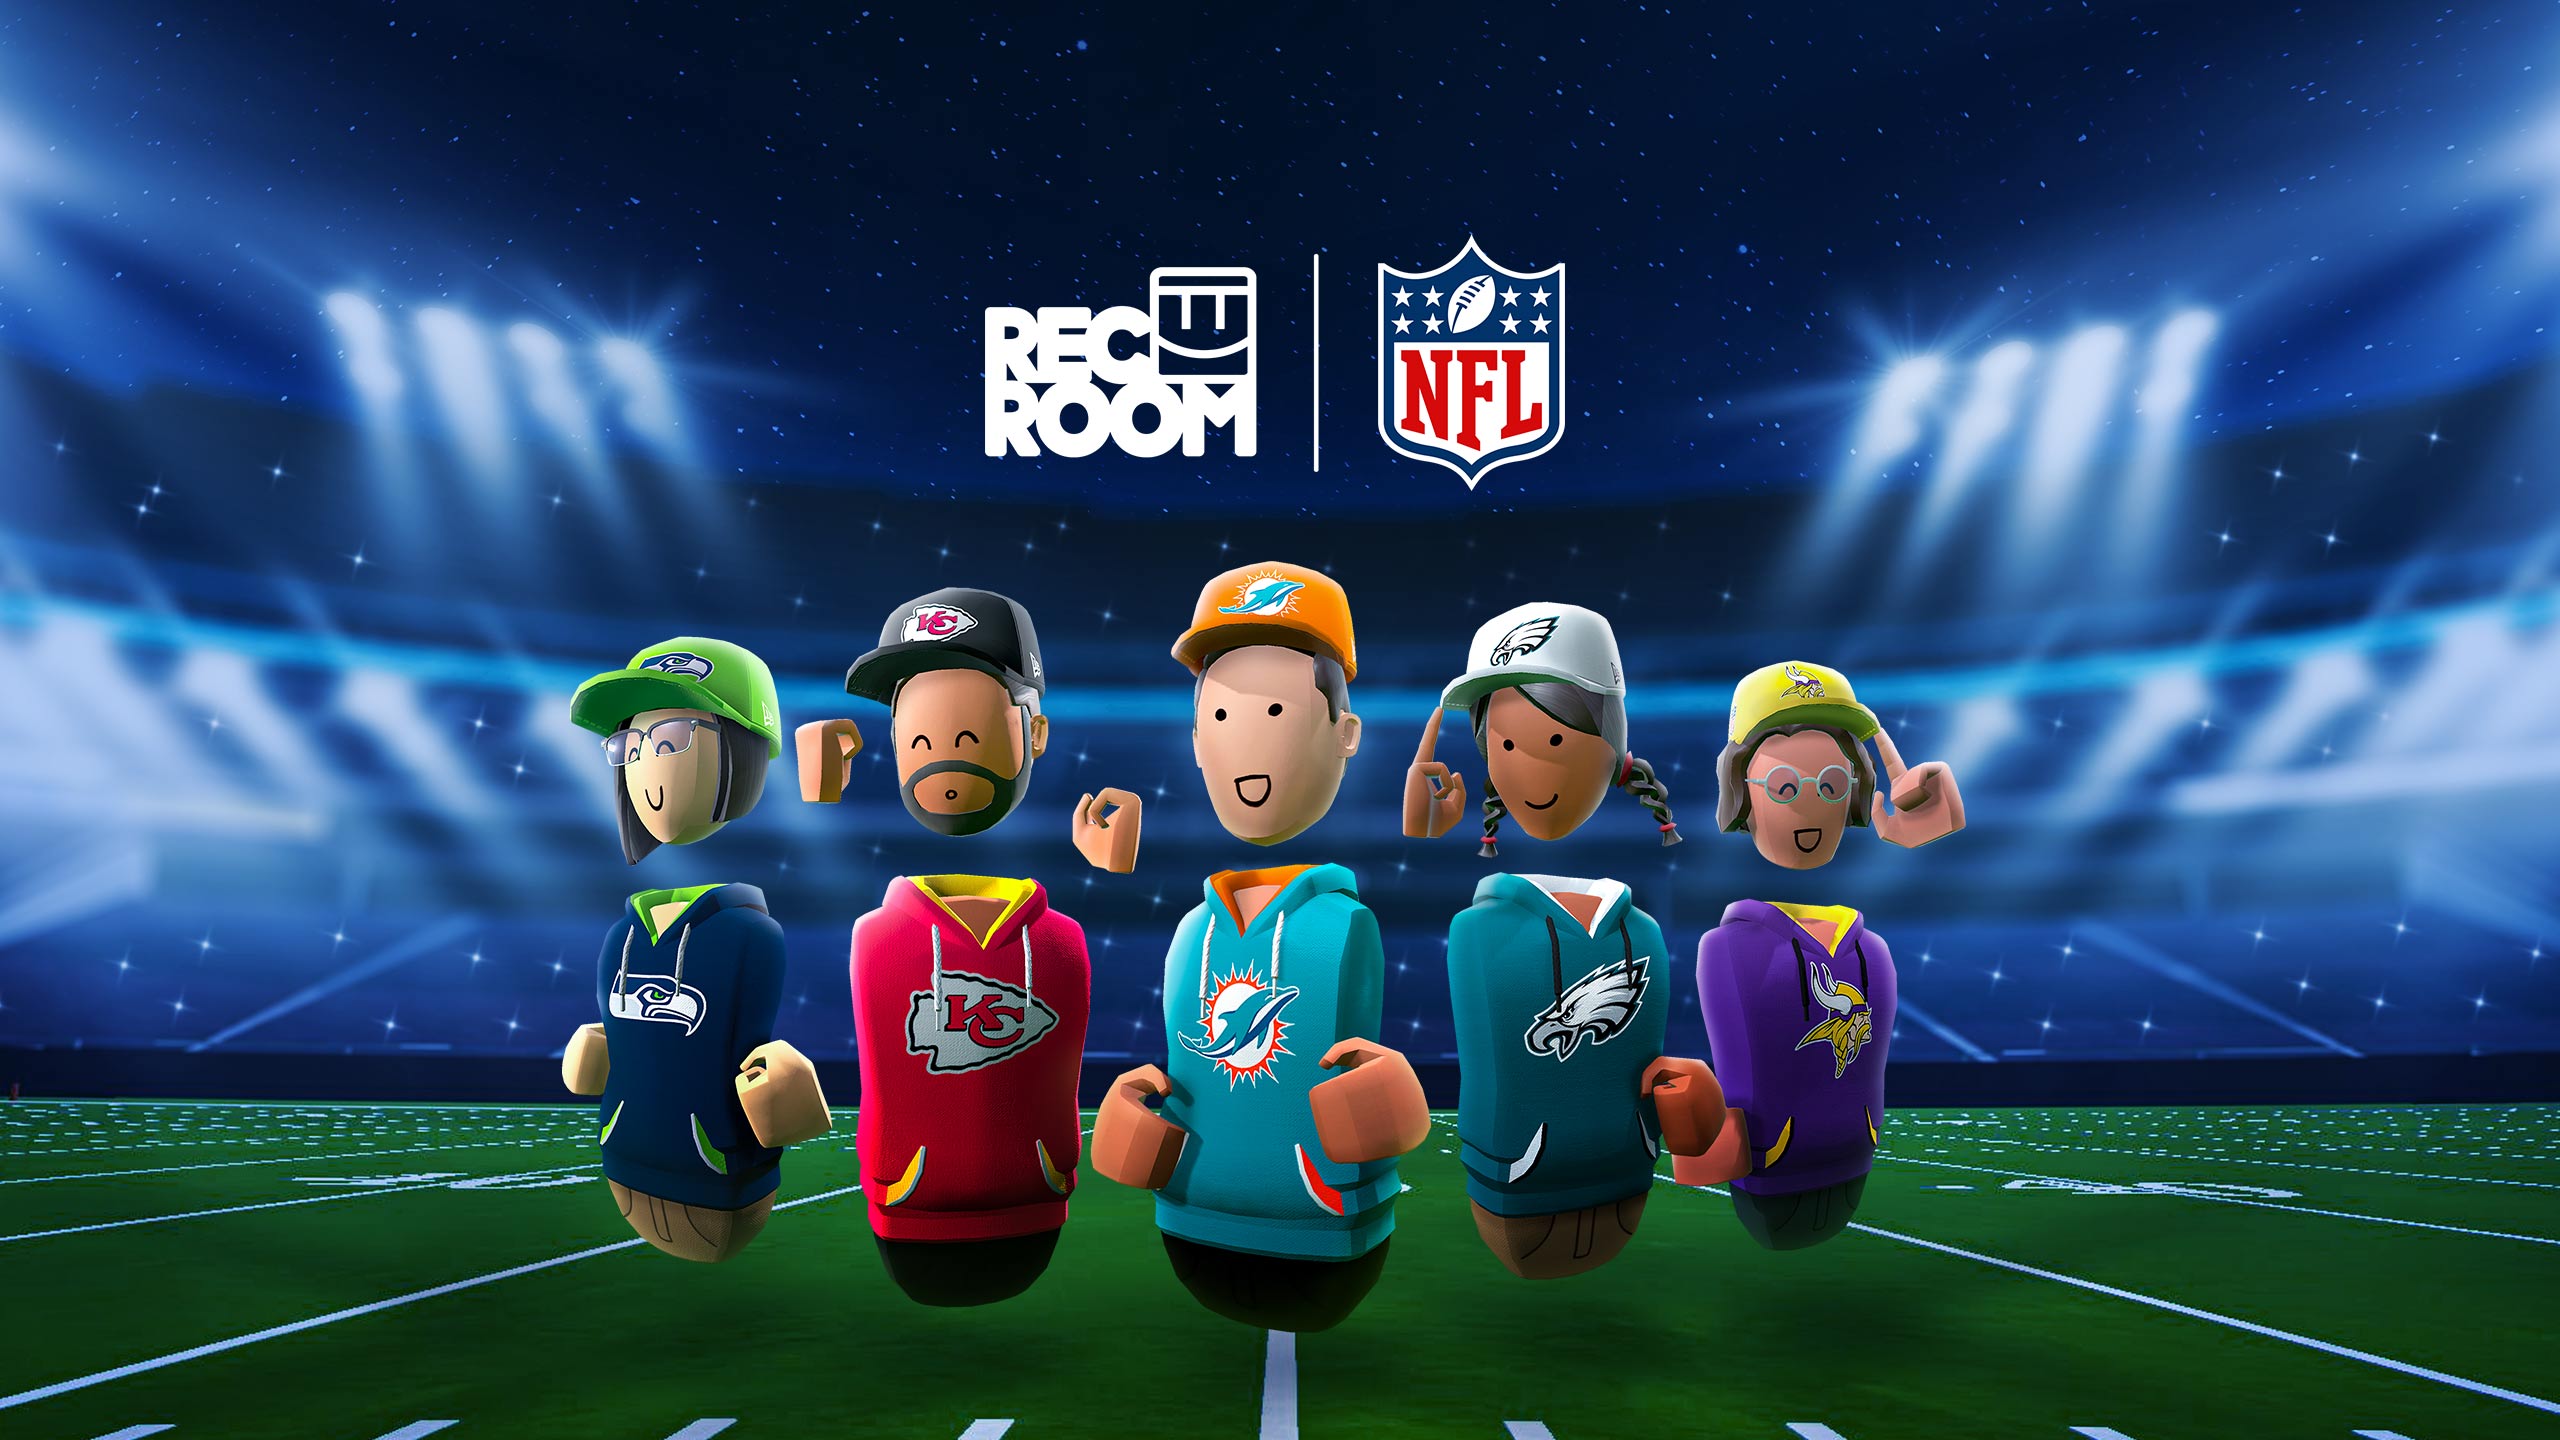 ‘Rec Room’ Teams Up with NFL for New Virtual Merch Featuring All 32 Teams – Road to VR